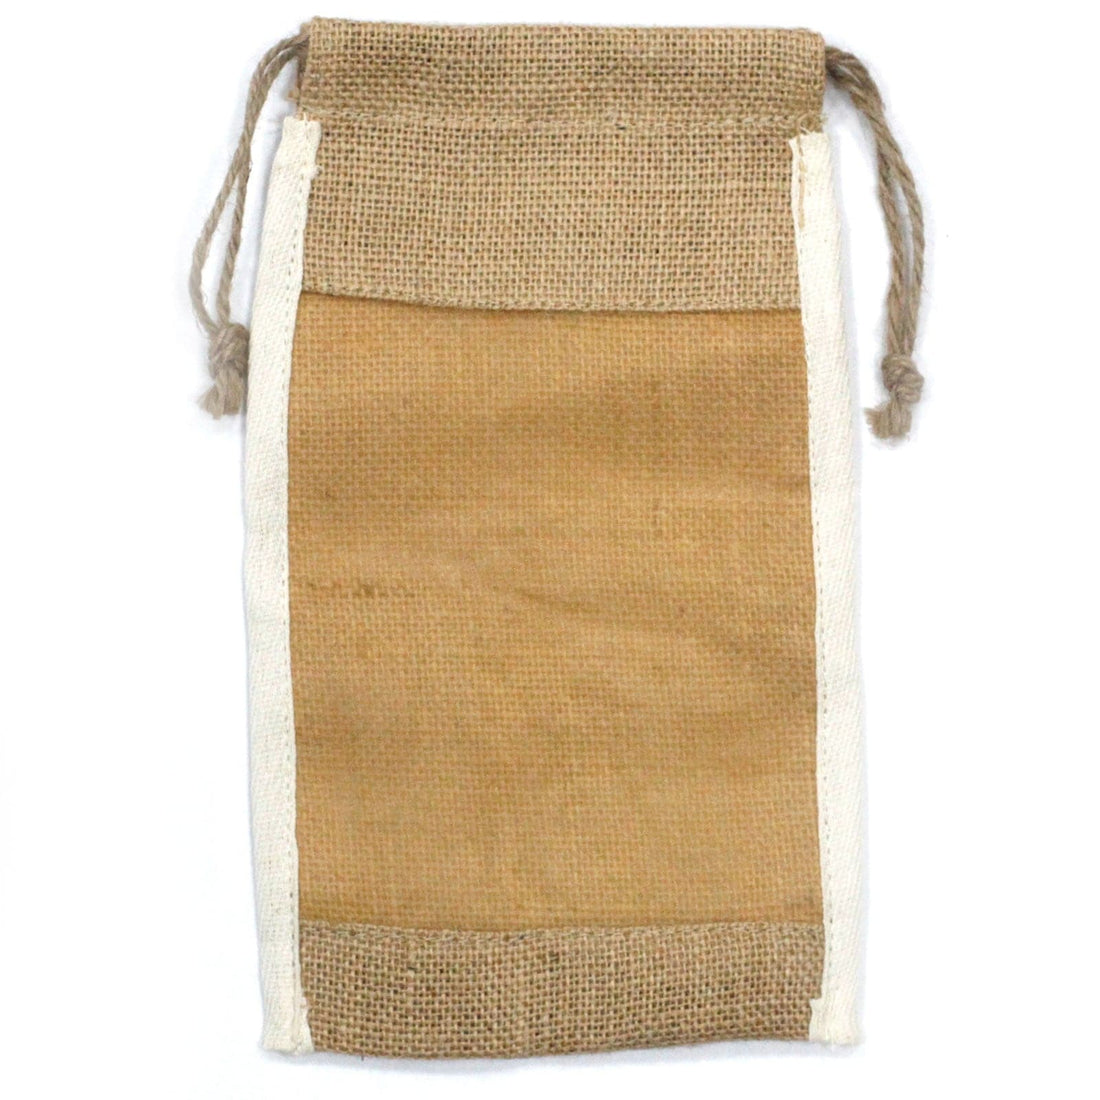 Lrg Washed Jute Pouch - 26x15cm - best price from Maltashopper.com NATWP-07